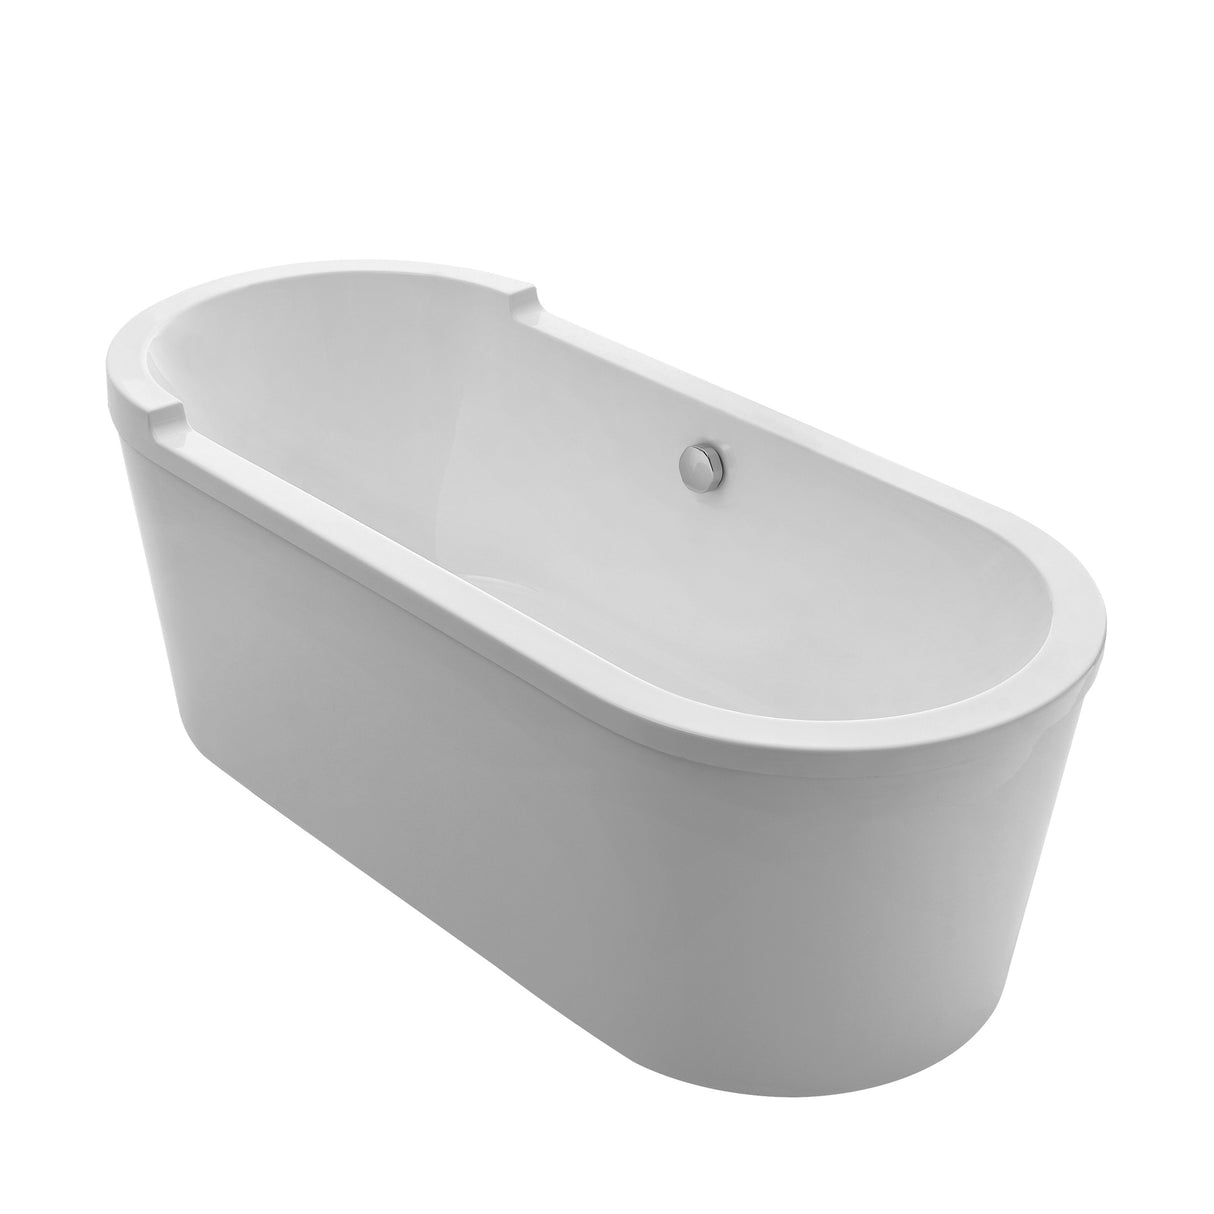 Bathhaus Oval Double Ended Single Sided Armrest Freestanding Lucite Acrylic Bathtub with a Chrome Mechanical Pop-up Waste and a Chrome Center Drain with Internal Overflow